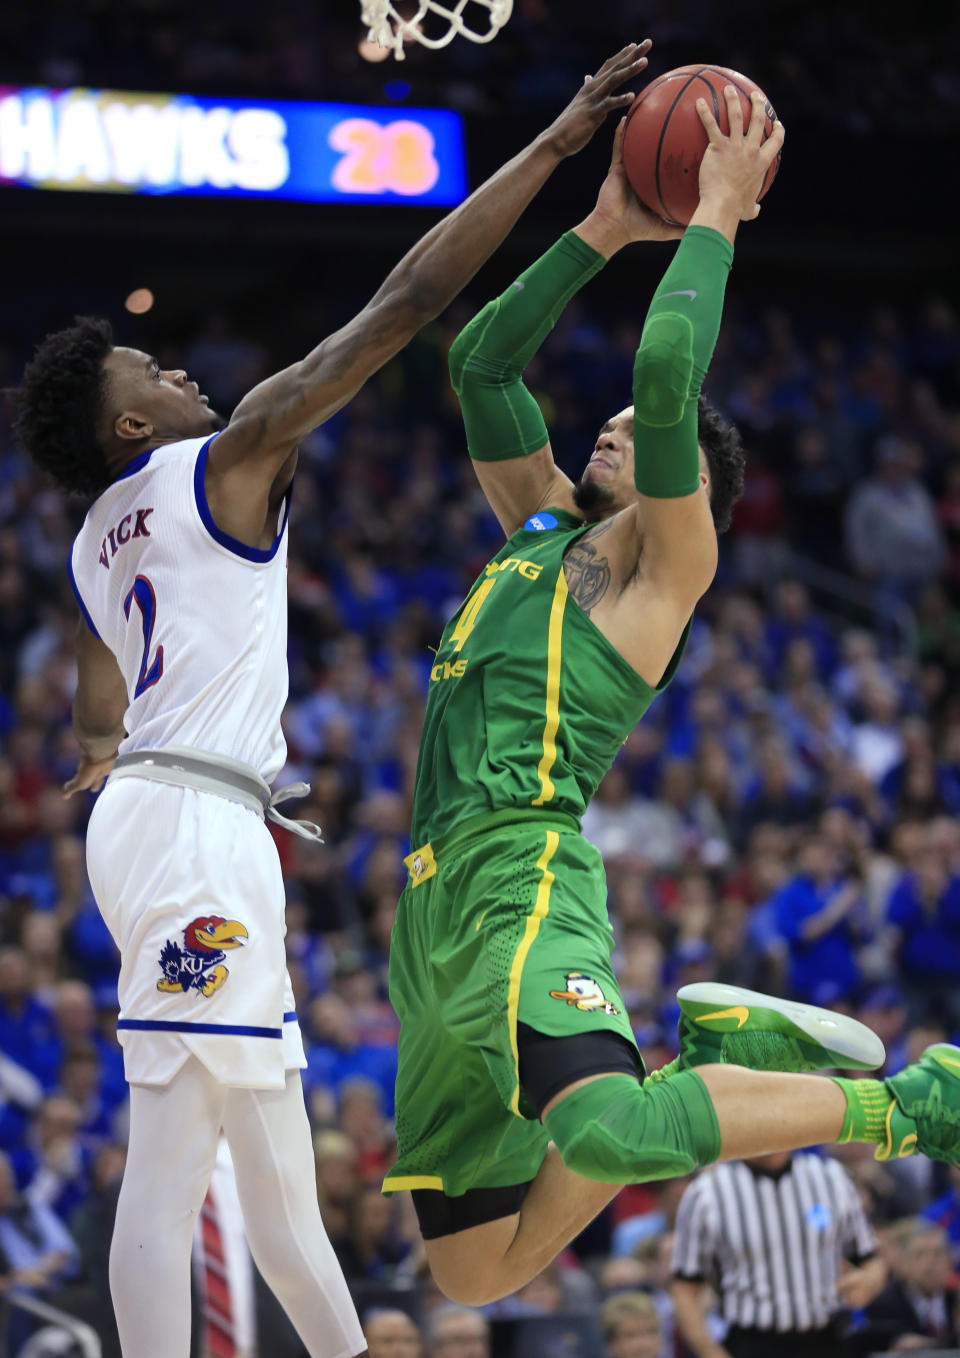 Oregon forward Dillon Brooks, right, shoots over Kansas guard Lagerald Vick during the first half of the Midwest Regional final of the NCAA men's college basketball tournament, Saturday, March 25, 2017, in Kansas City, Mo. (AP Photo/Orlin Wagner)